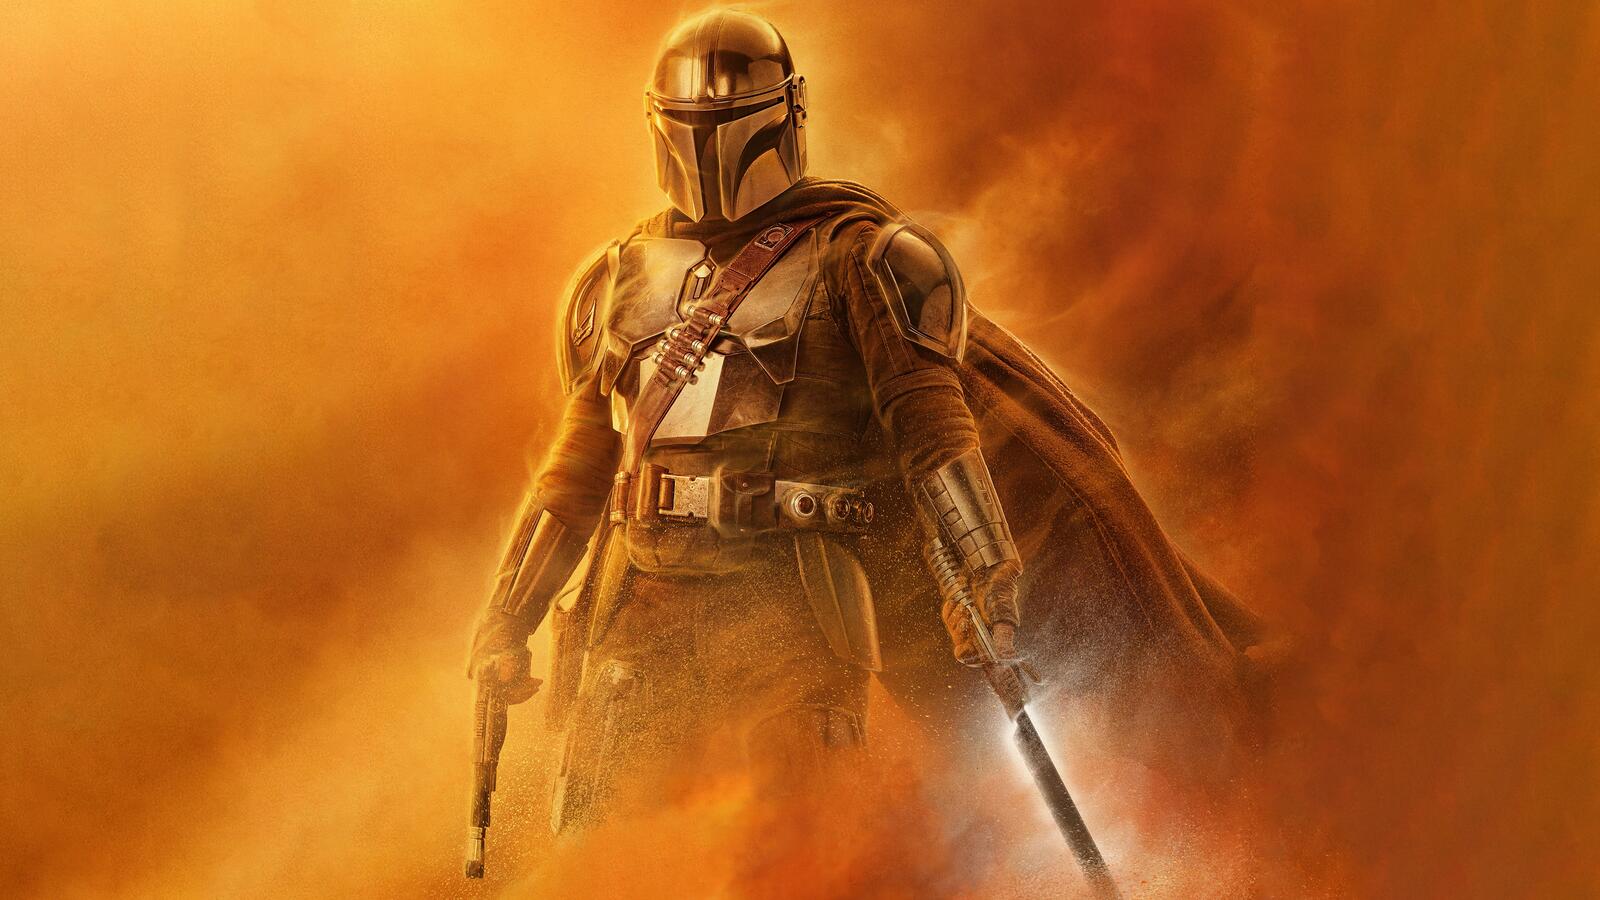 Wallpapers the mandalorian star wars movies on the desktop